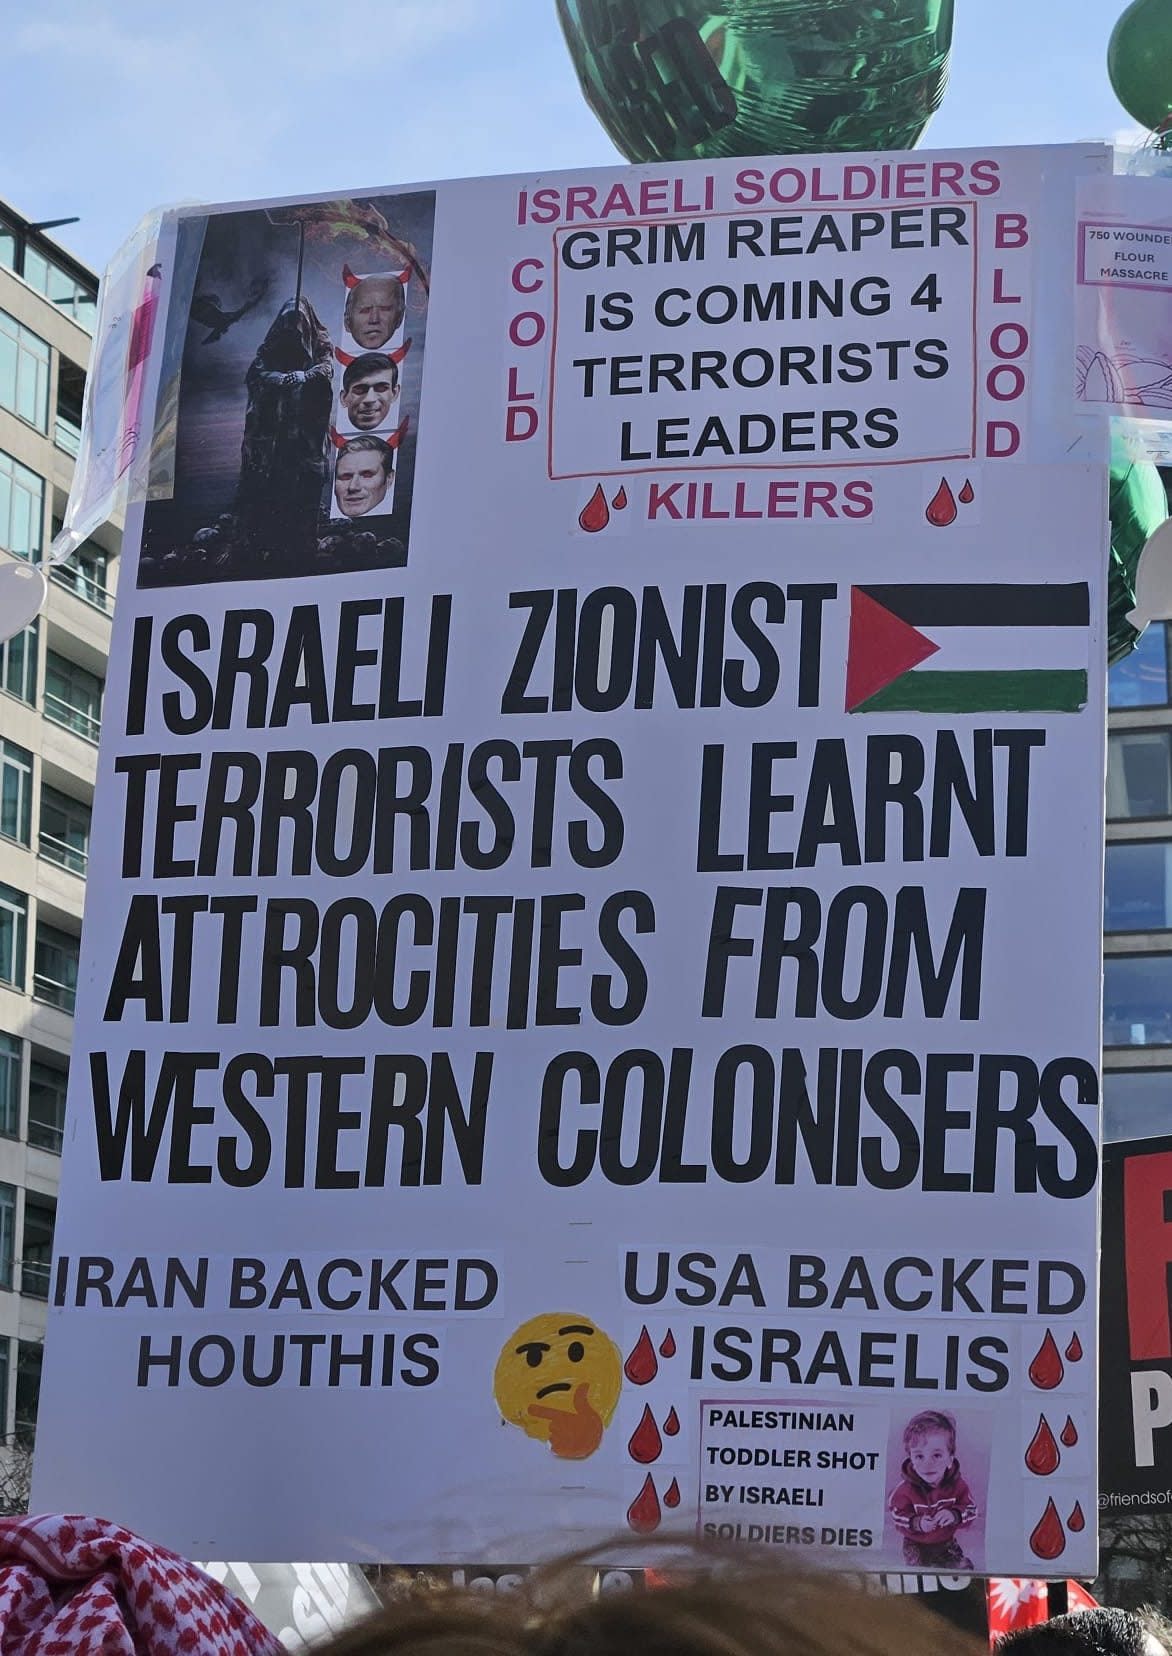 One of the placards held at the protest